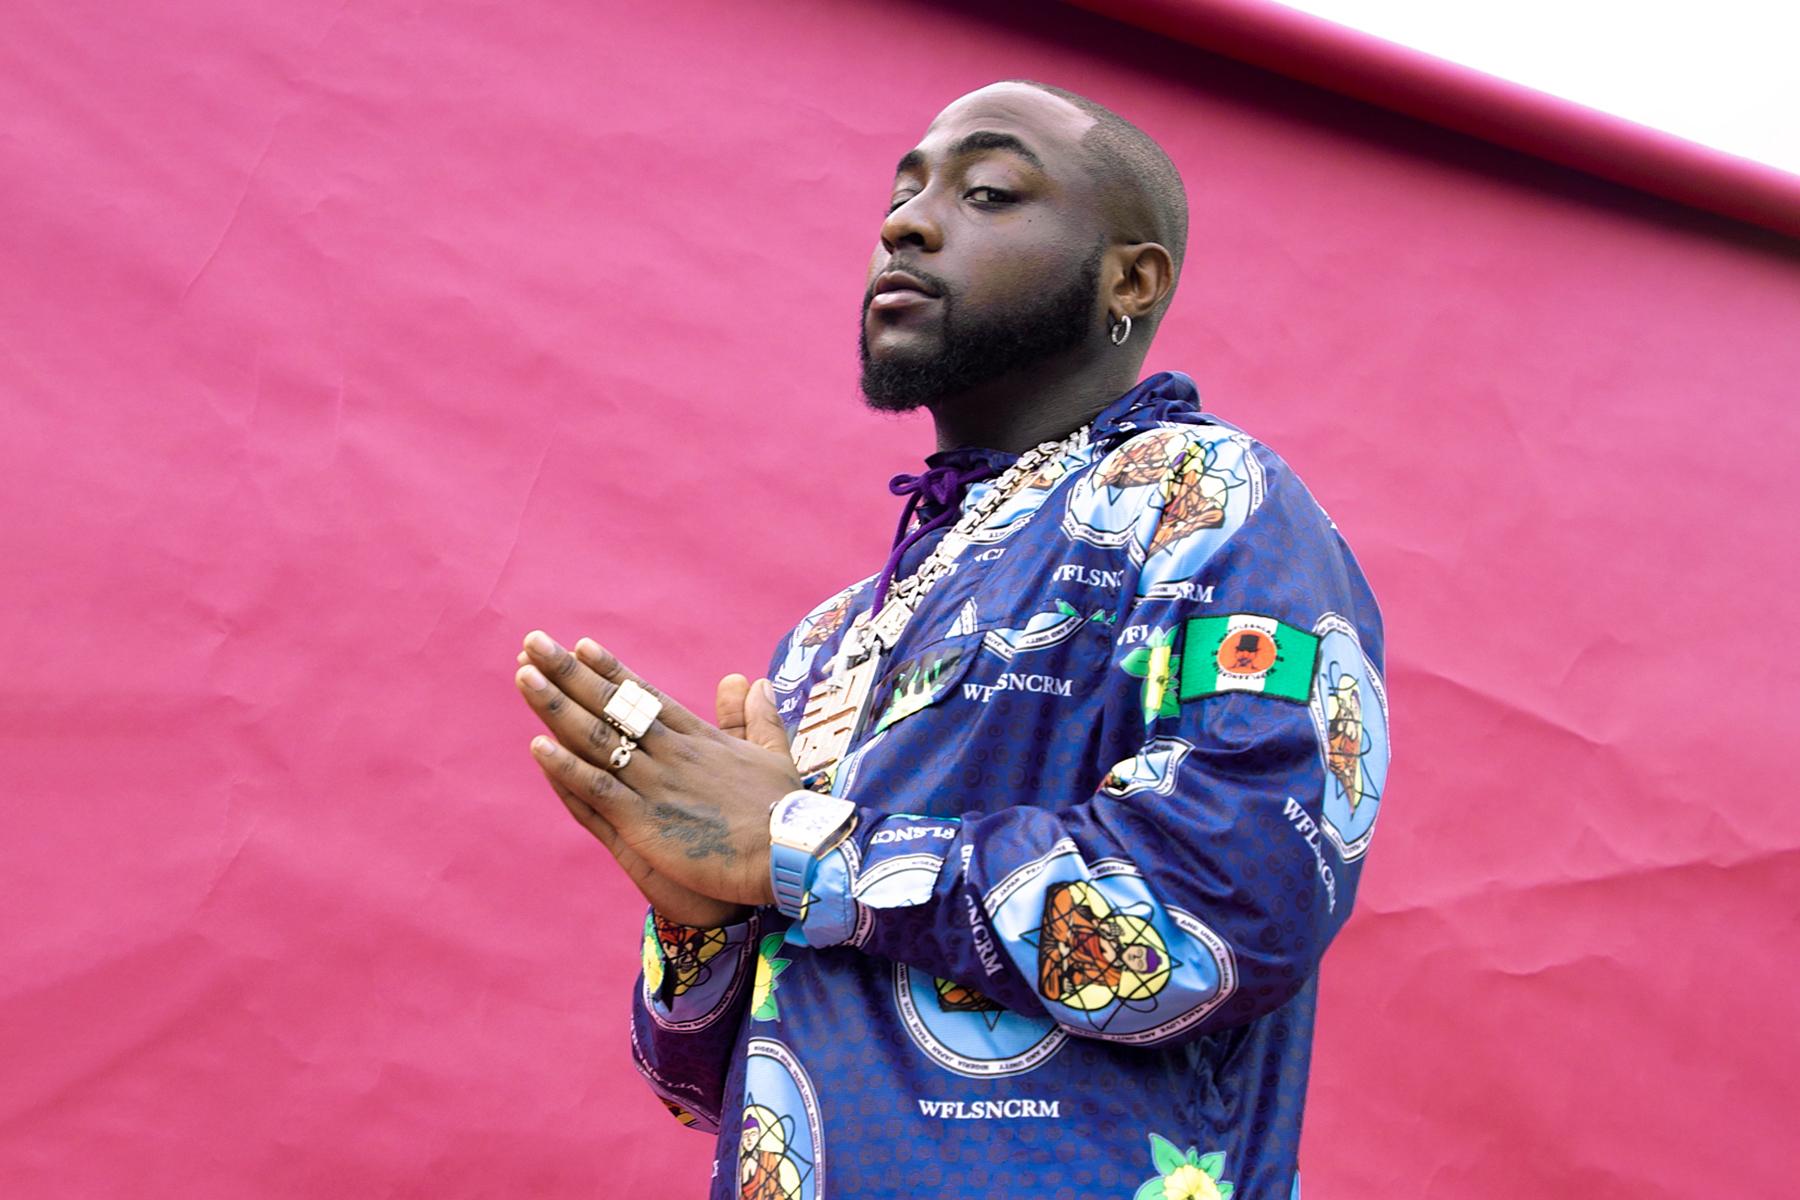 Fan entertains Davido with a hilarious performance of his song “IF” (Video)